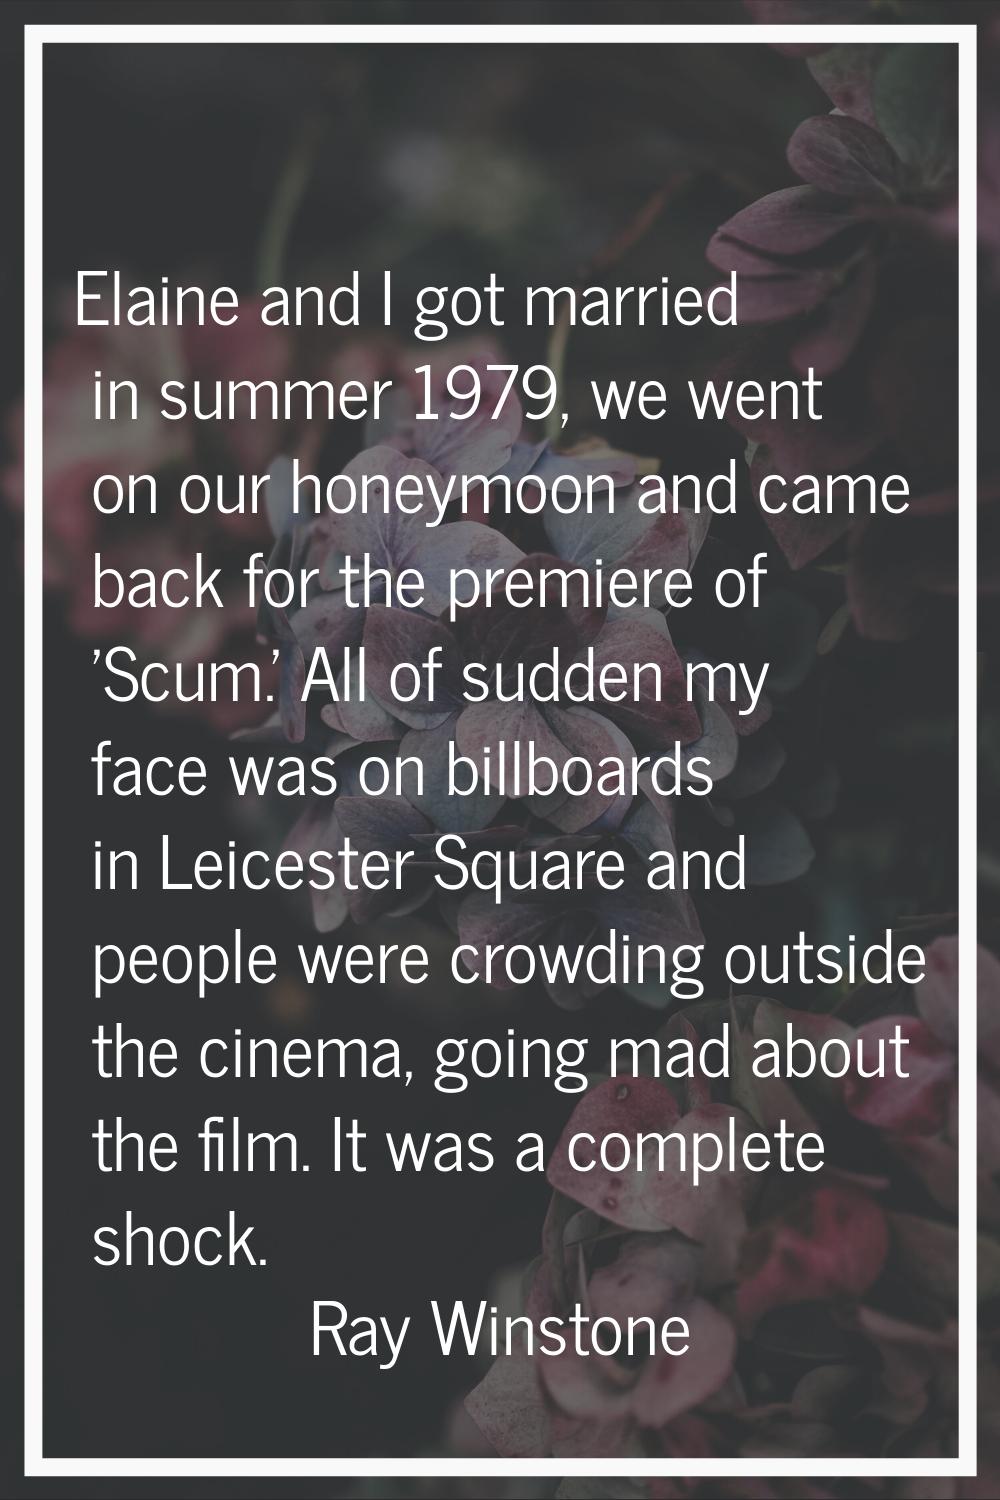 Elaine and I got married in summer 1979, we went on our honeymoon and came back for the premiere of